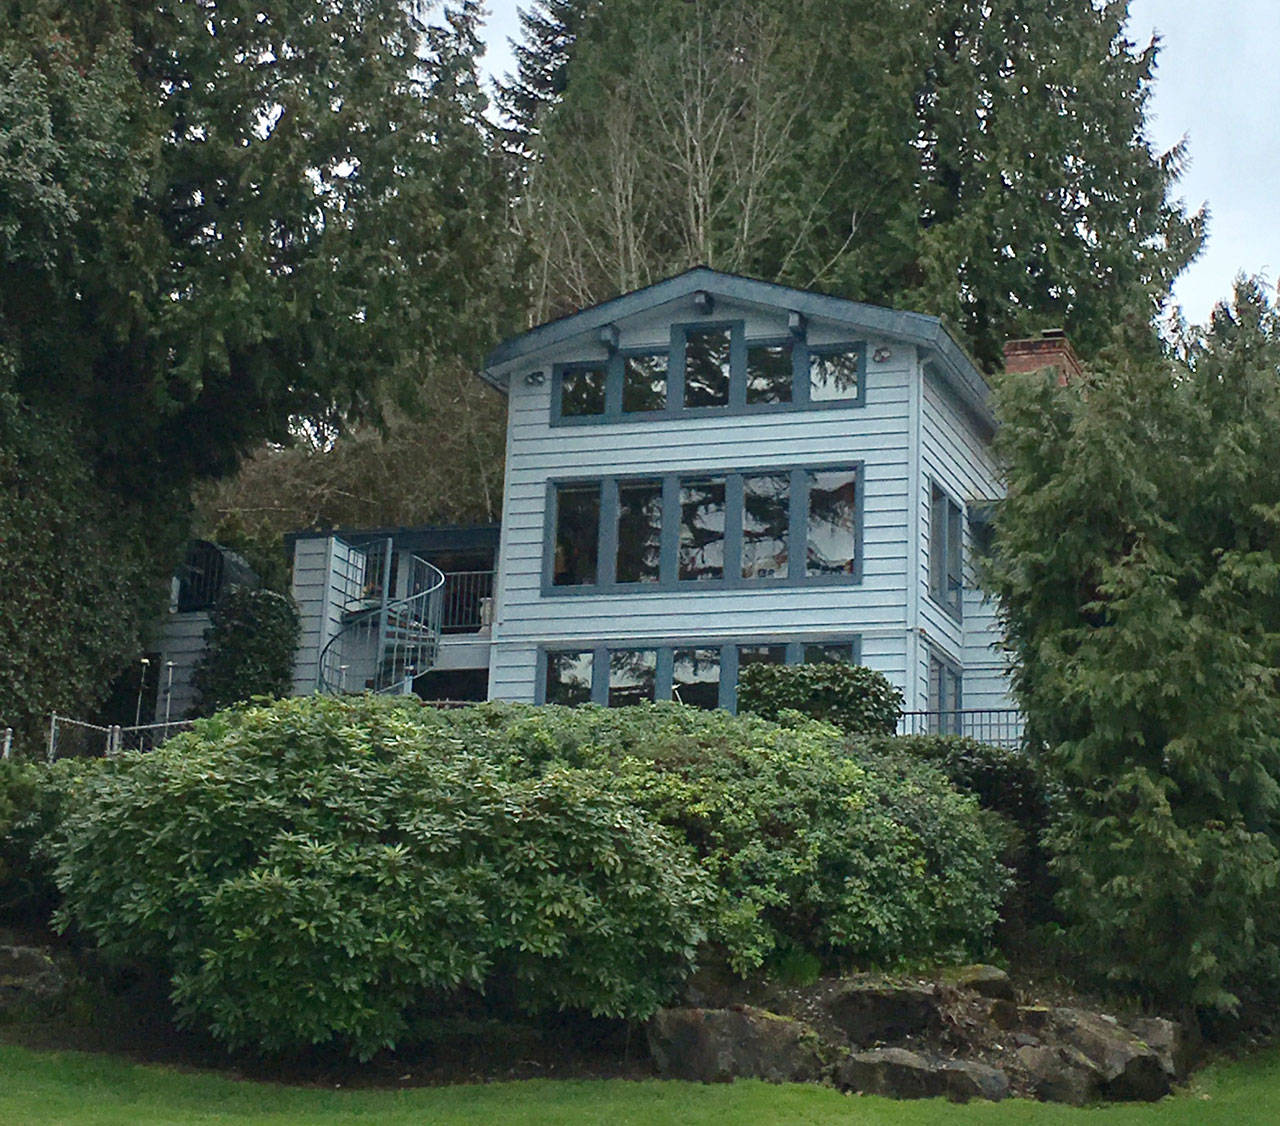 The late actress Donna Reed lived in this home on Mercer Island in the late 1970s. Photo courtesy of Greg Asimakoupoulos